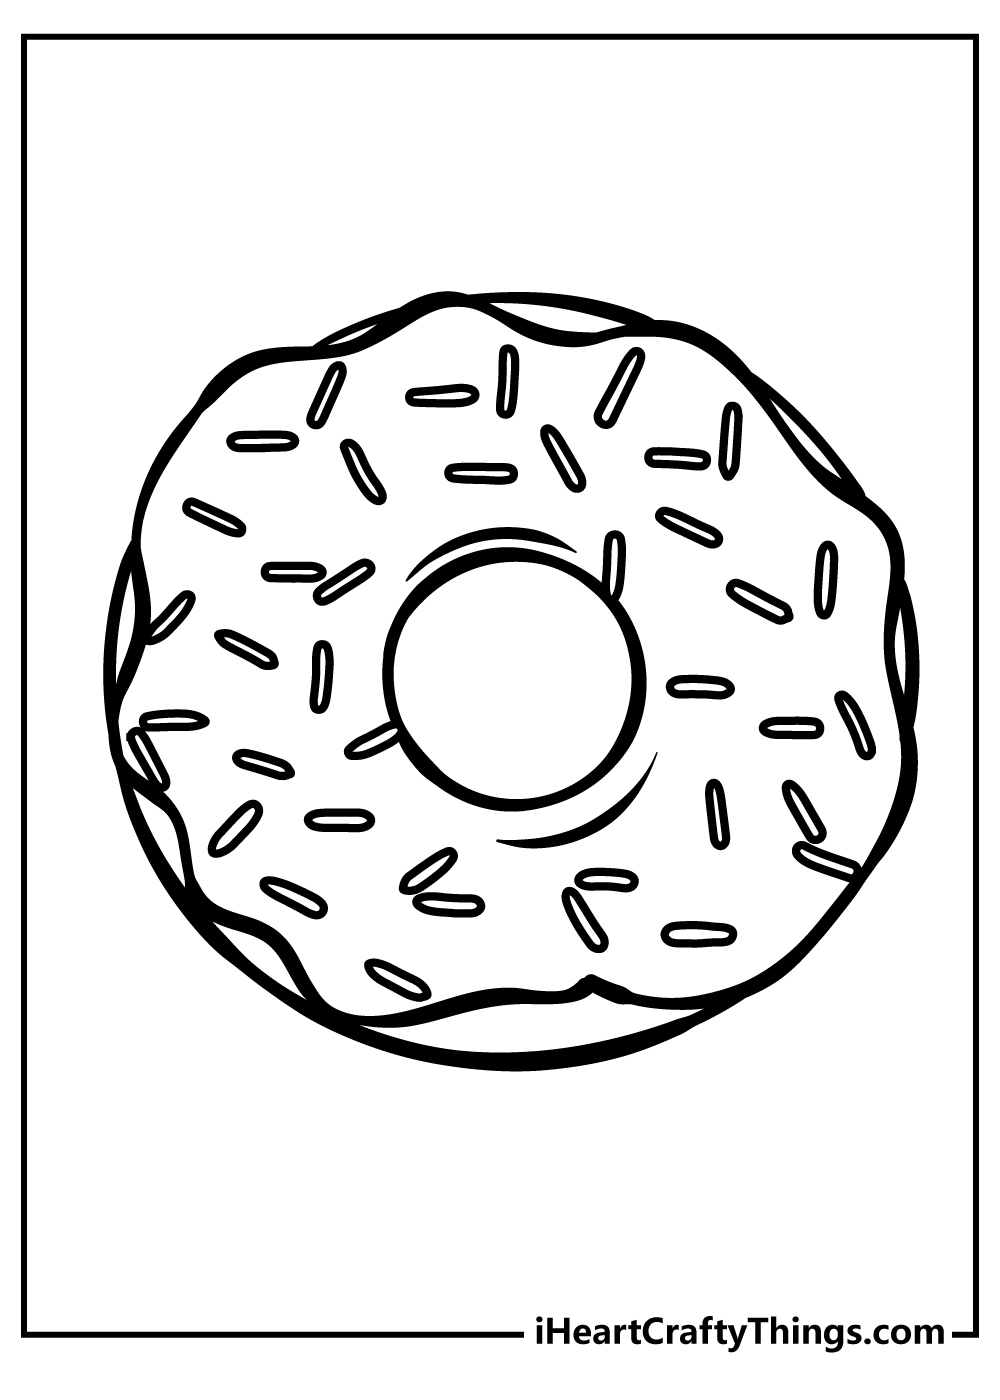 Donut Coloring Pages for preschoolers free printable